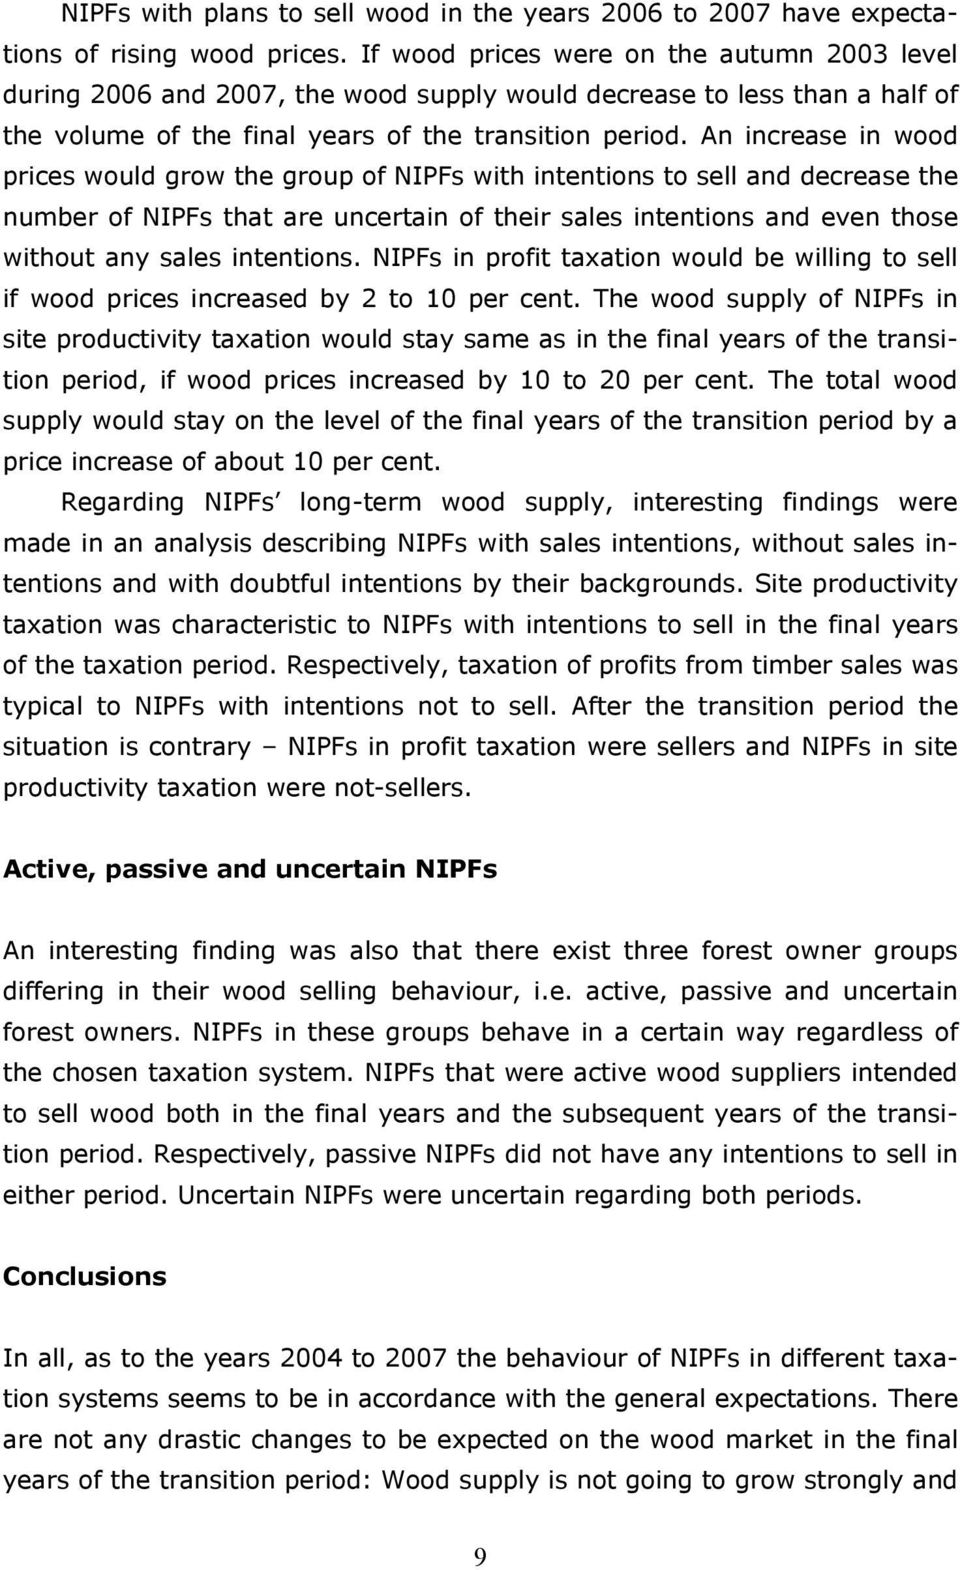 An increase in wood prices would grow the group of NIPFs with intentions to sell and decrease the number of NIPFs that are uncertain of their sales intentions and even those without any sales